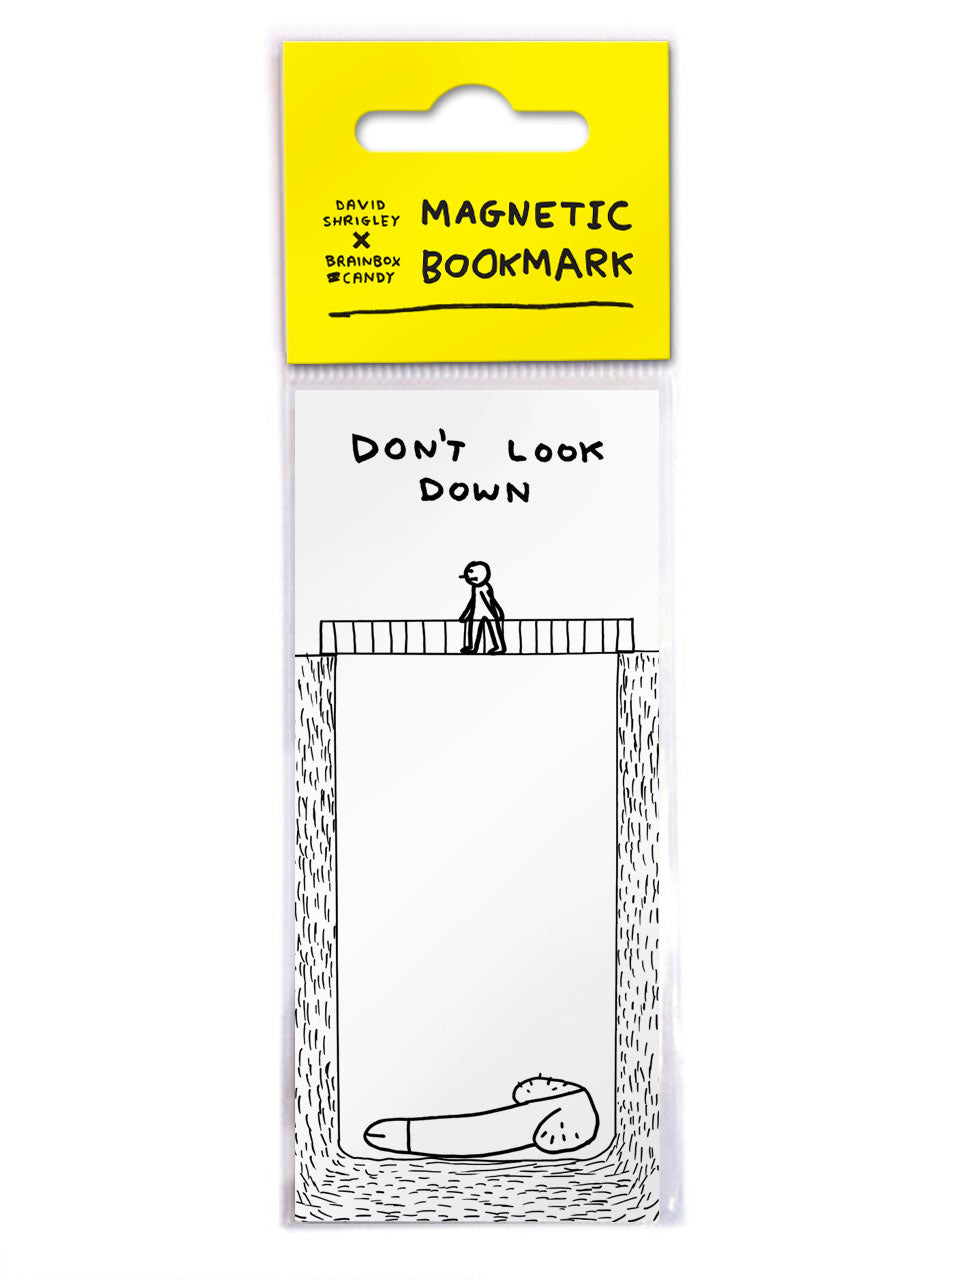 Don't Look Down Magnetic Bookmark by David Shrigley